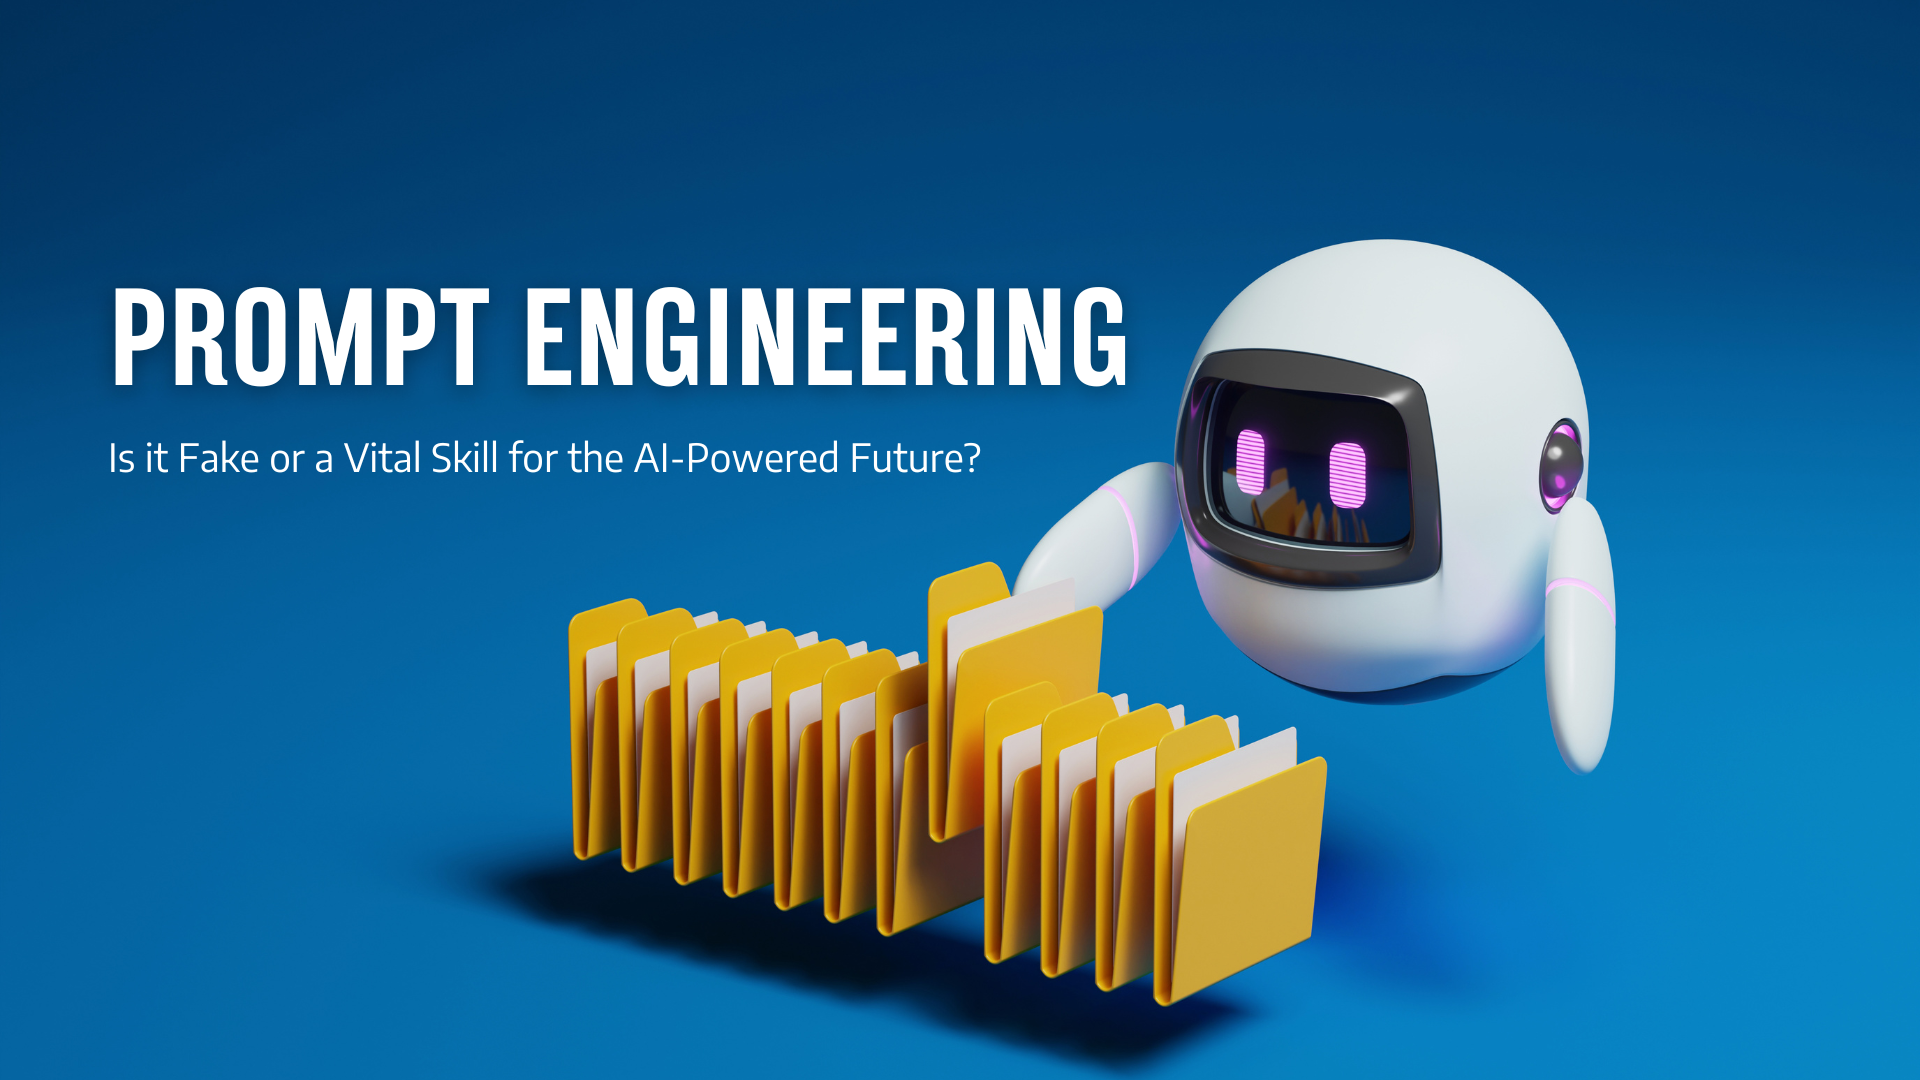 Prompt Engineering – Is it Fake or a Vital Skill for the AI-Powered Future?